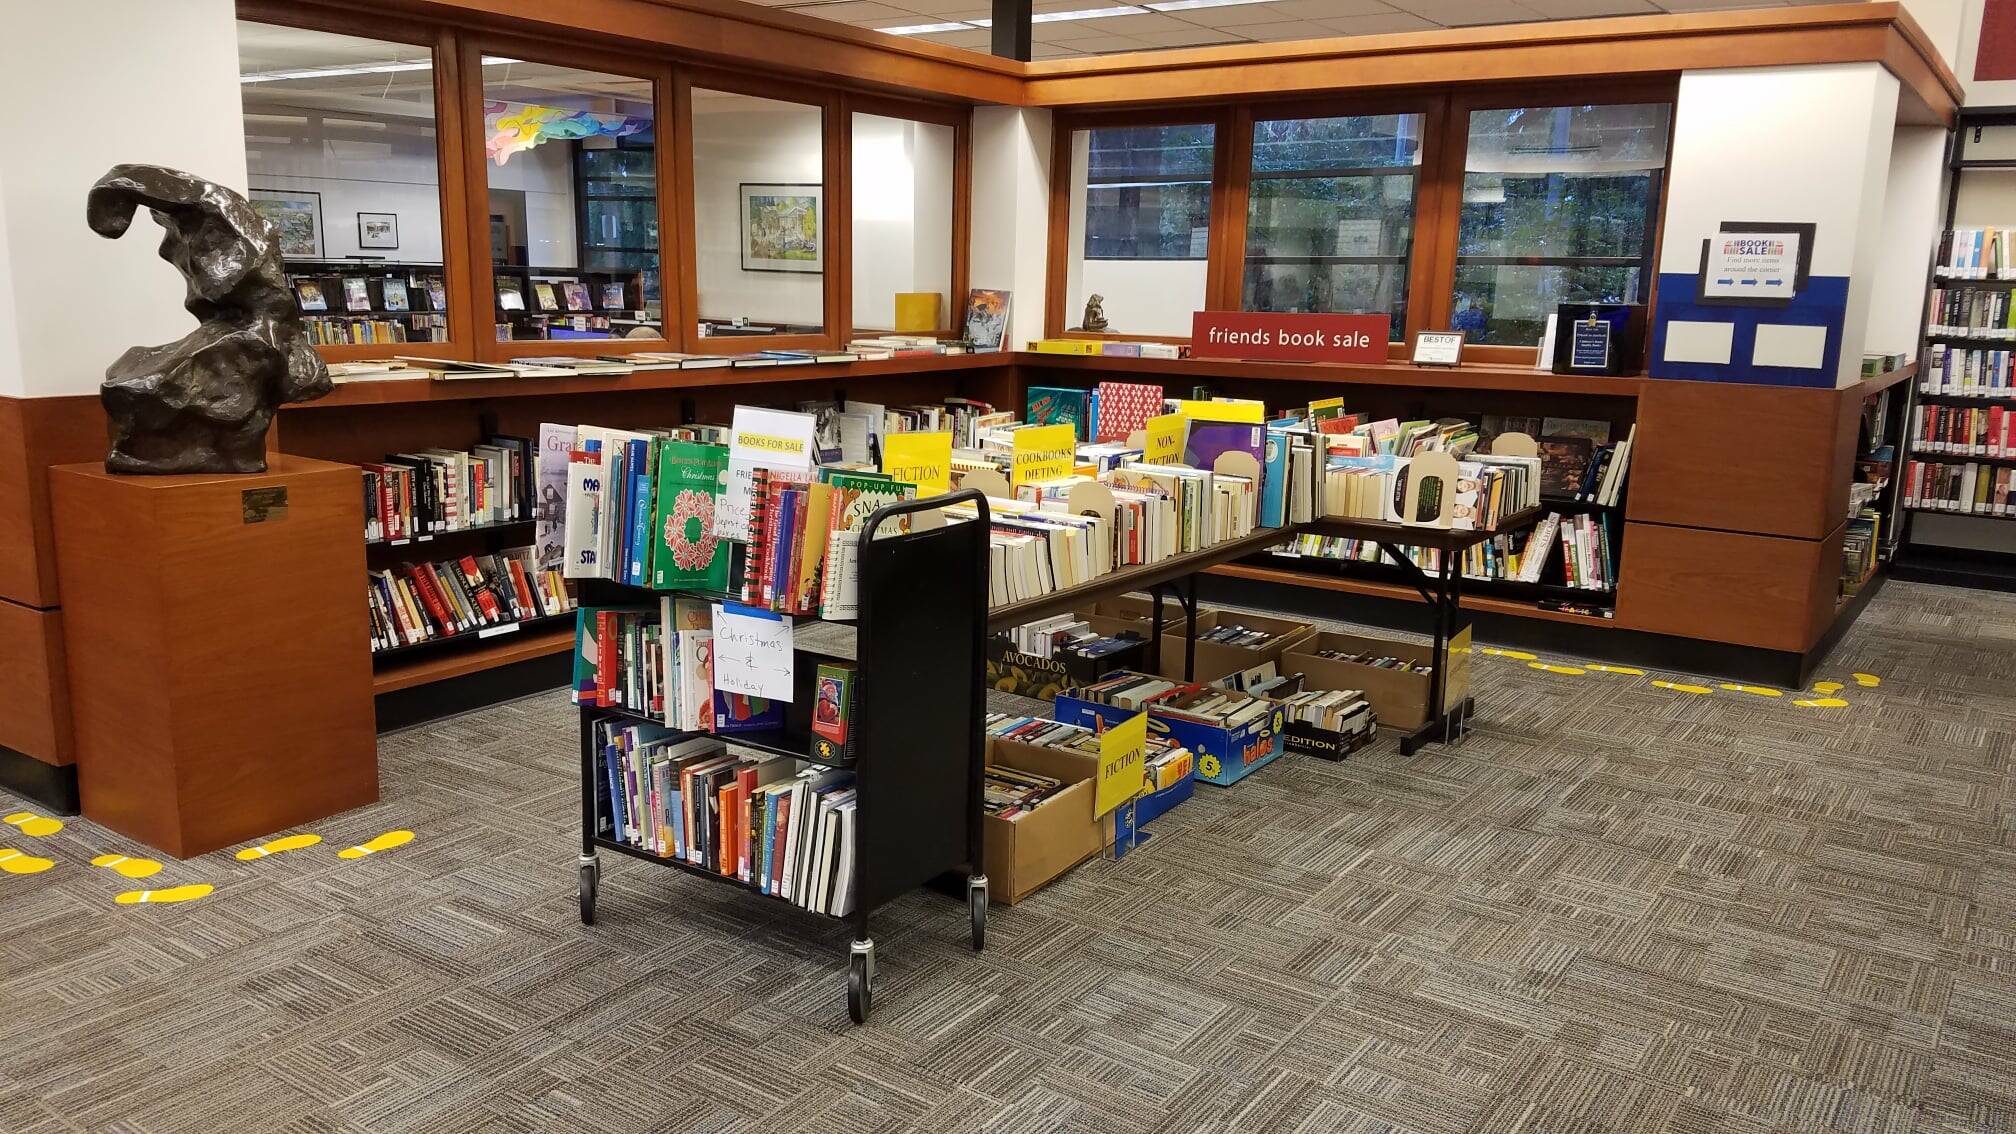 From now until Dec. 11, The Friends of the Mercer Island Library is holding a Pop-Up Holiday Book Sale in the library in front of its regular shelf sale books. They are open during library hours: 1-8 p.m. Tuesday and Wednesday and 10 a.m. to 5 p.m. Thursday, Friday and Saturday at 4400 88th Ave. SE. Holiday books are available as well as lots of children’s and fiction, and they will be re-stocking daily. Prices are marked and payments can be made by depositing cash or check in one of the two cash boxes. One hundred percent of the proceeds from the sale go to support programs at the Mercer Island Library. Courtesy photo